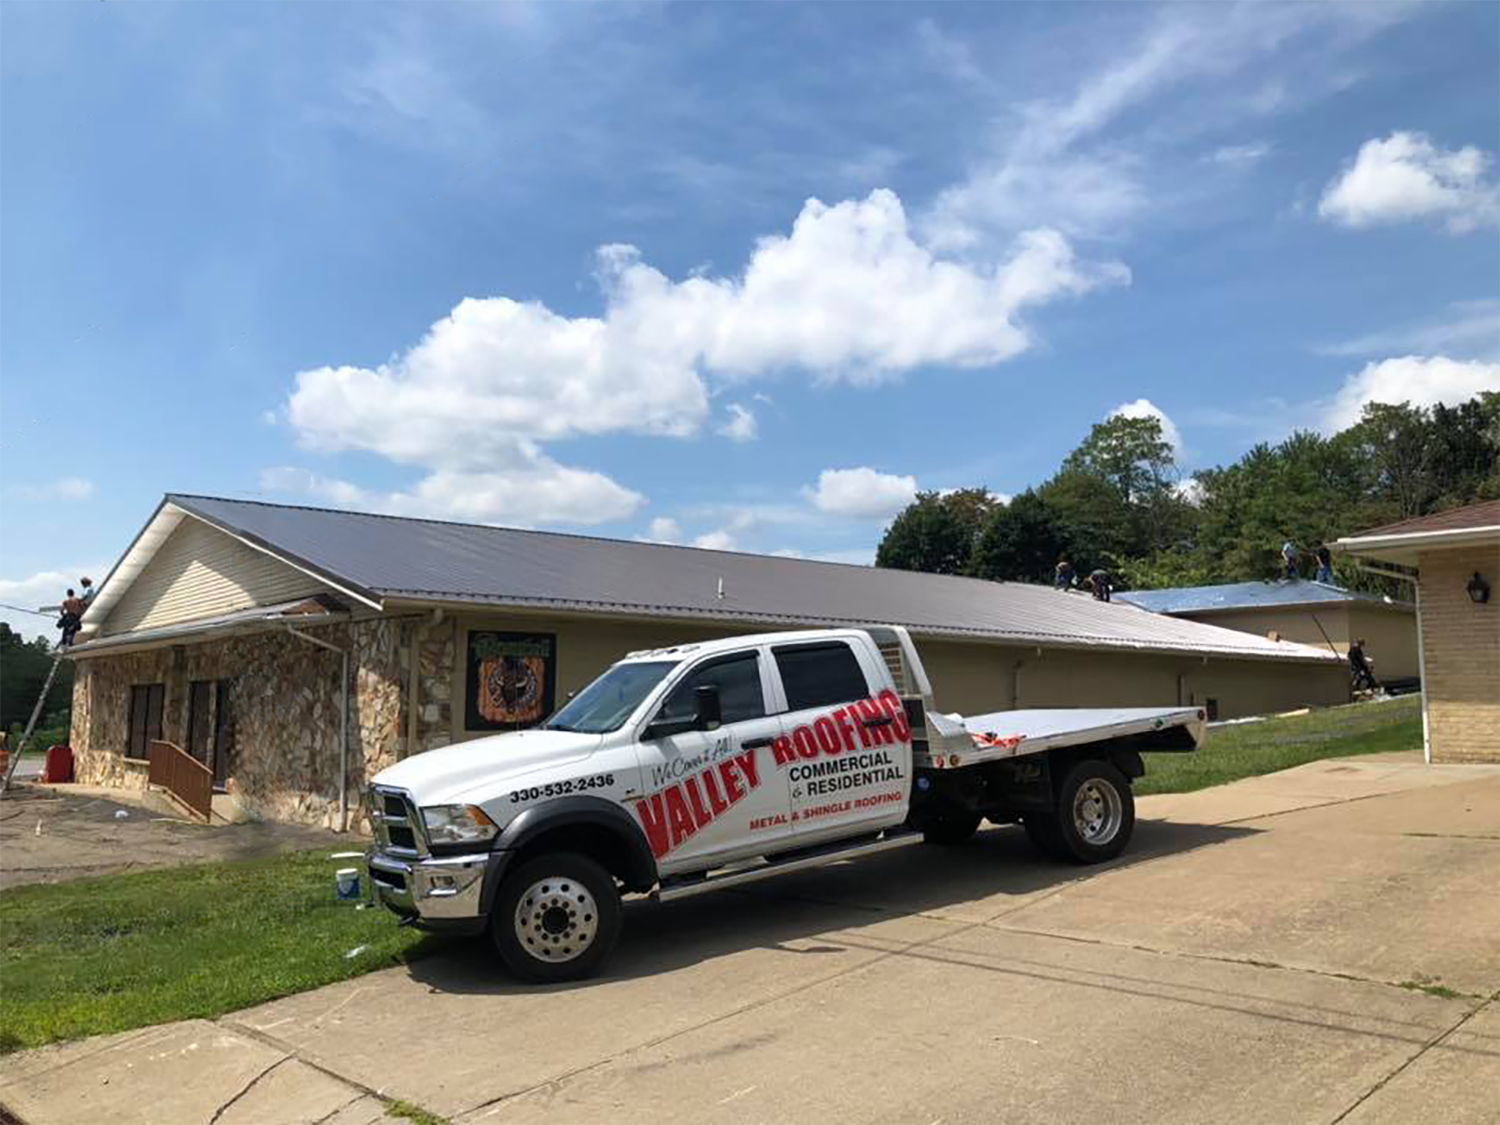 A Valley Roofing truck parks outside one of their latest projects, a big beautiful metal roof.